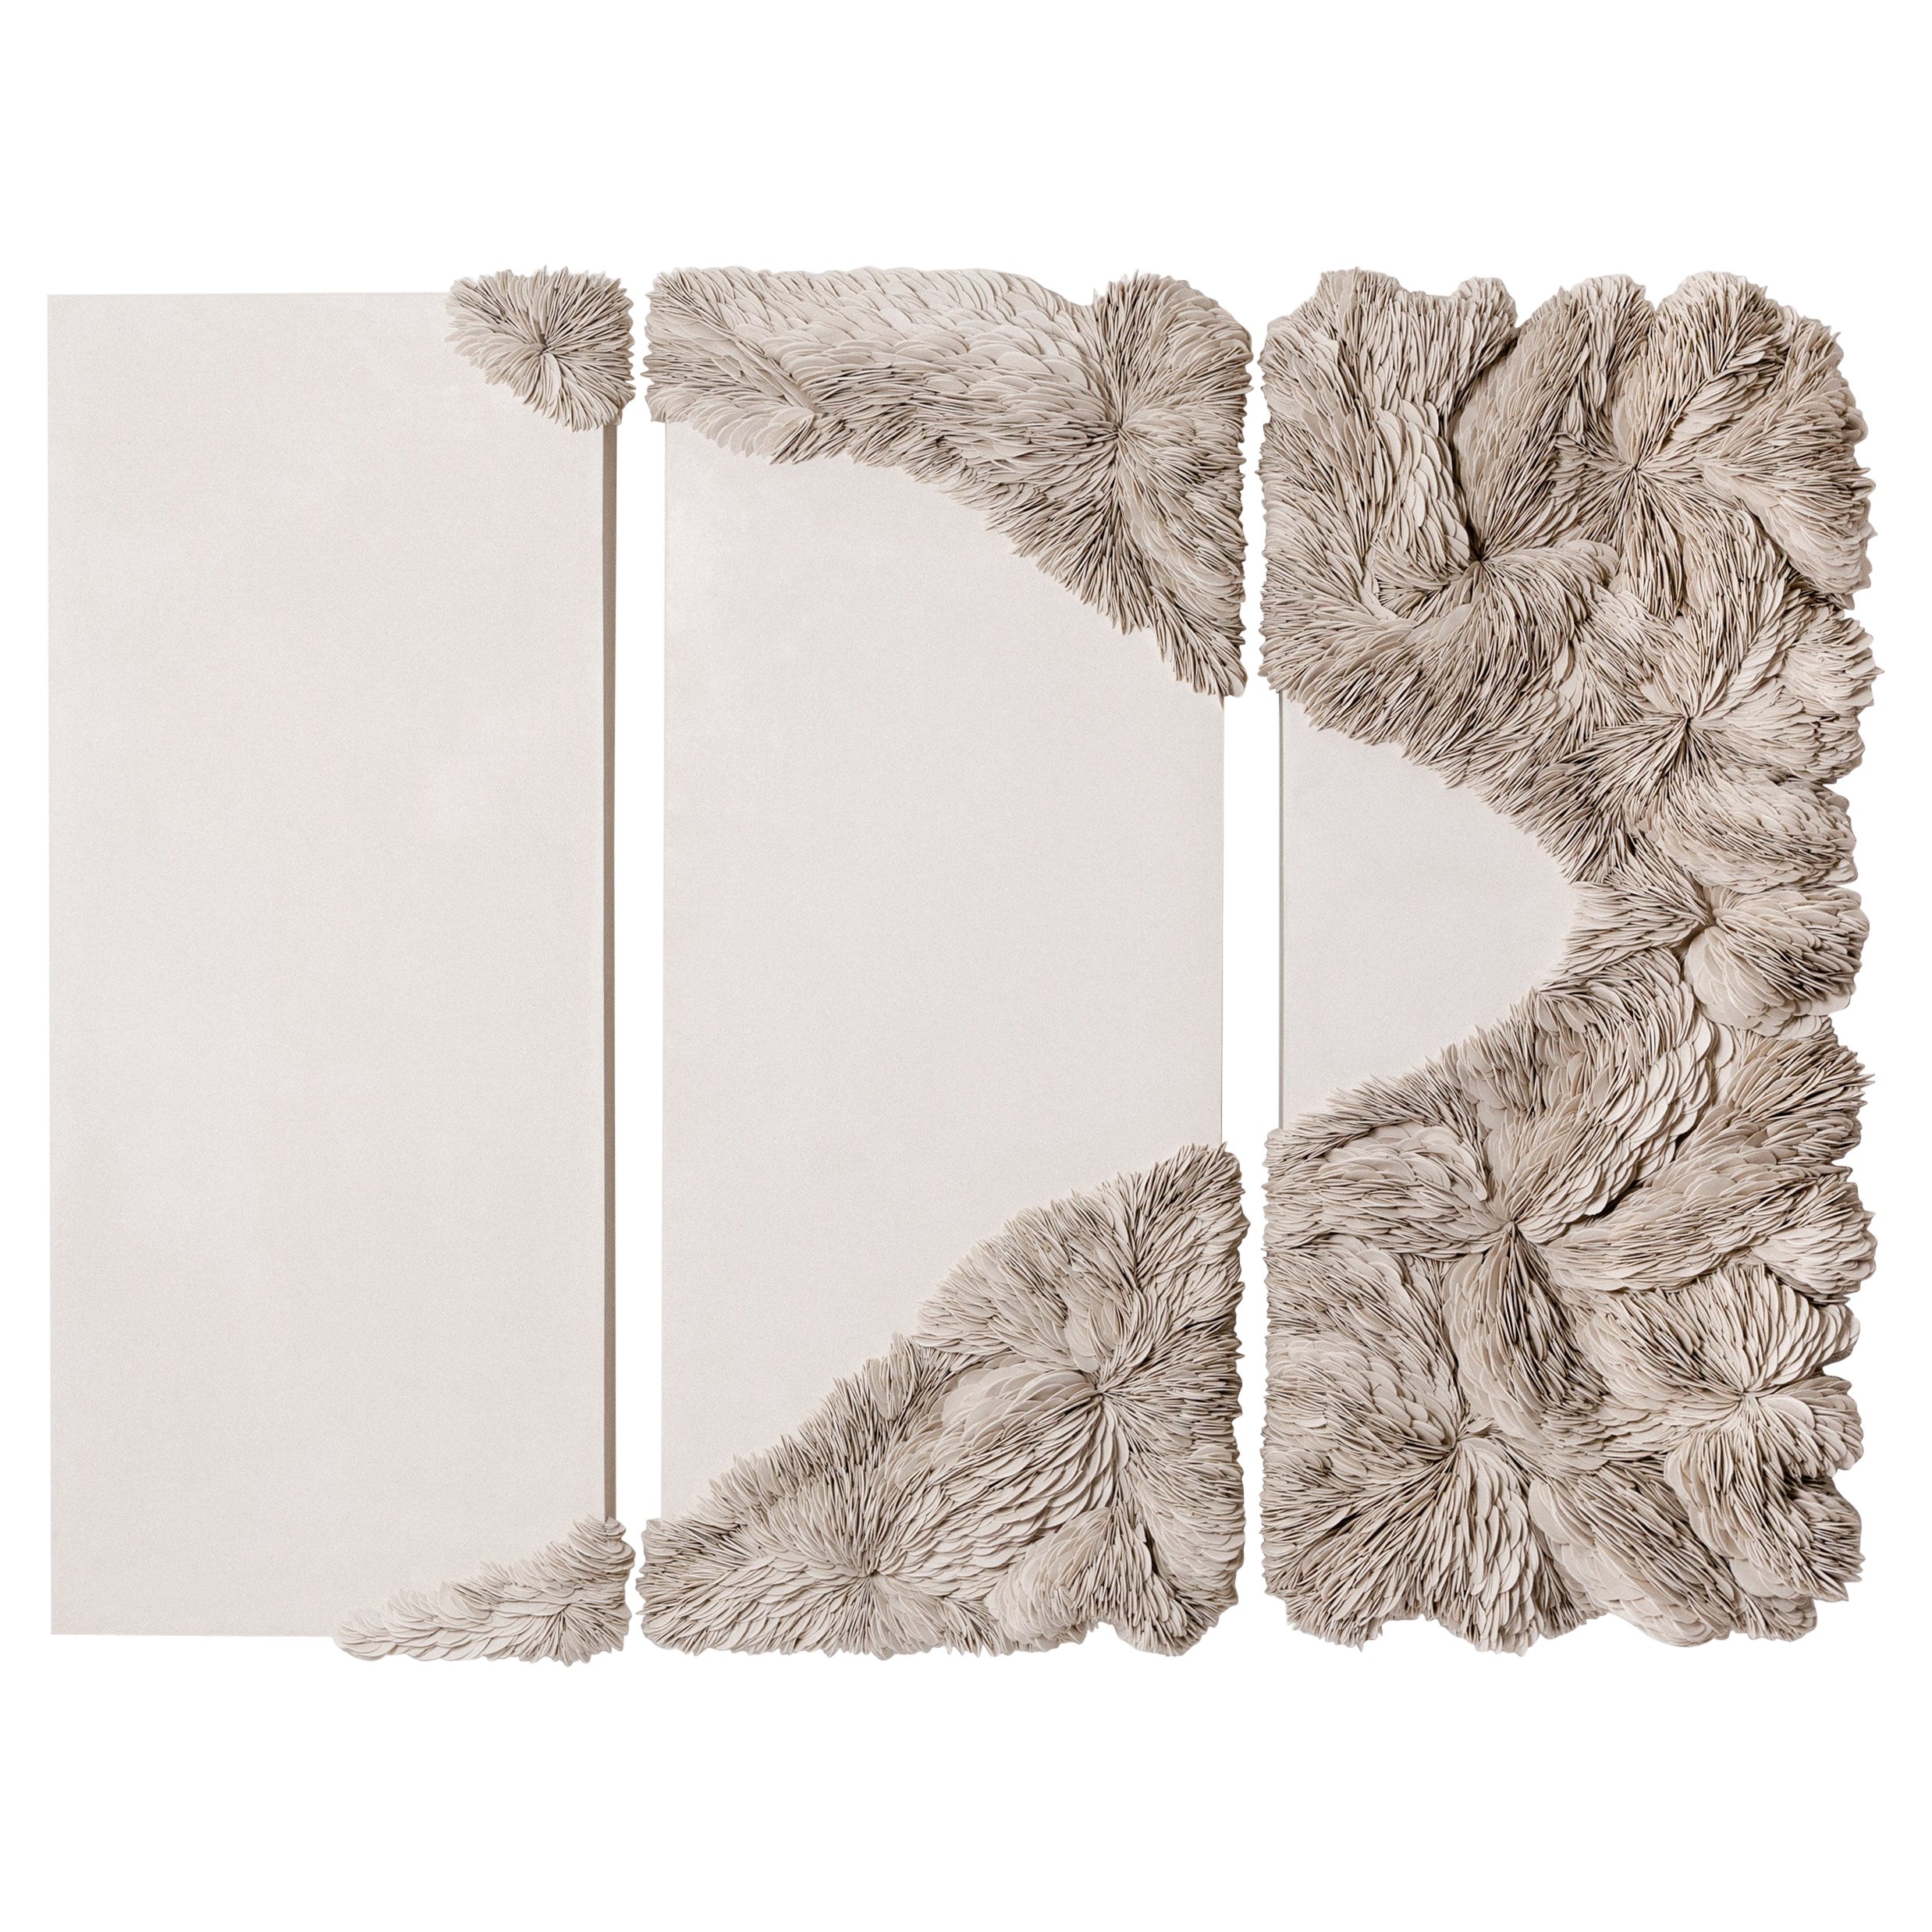 Collapsed Triptych in Sand, porcelain & plaster wall artwork by Olivia Walker For Sale